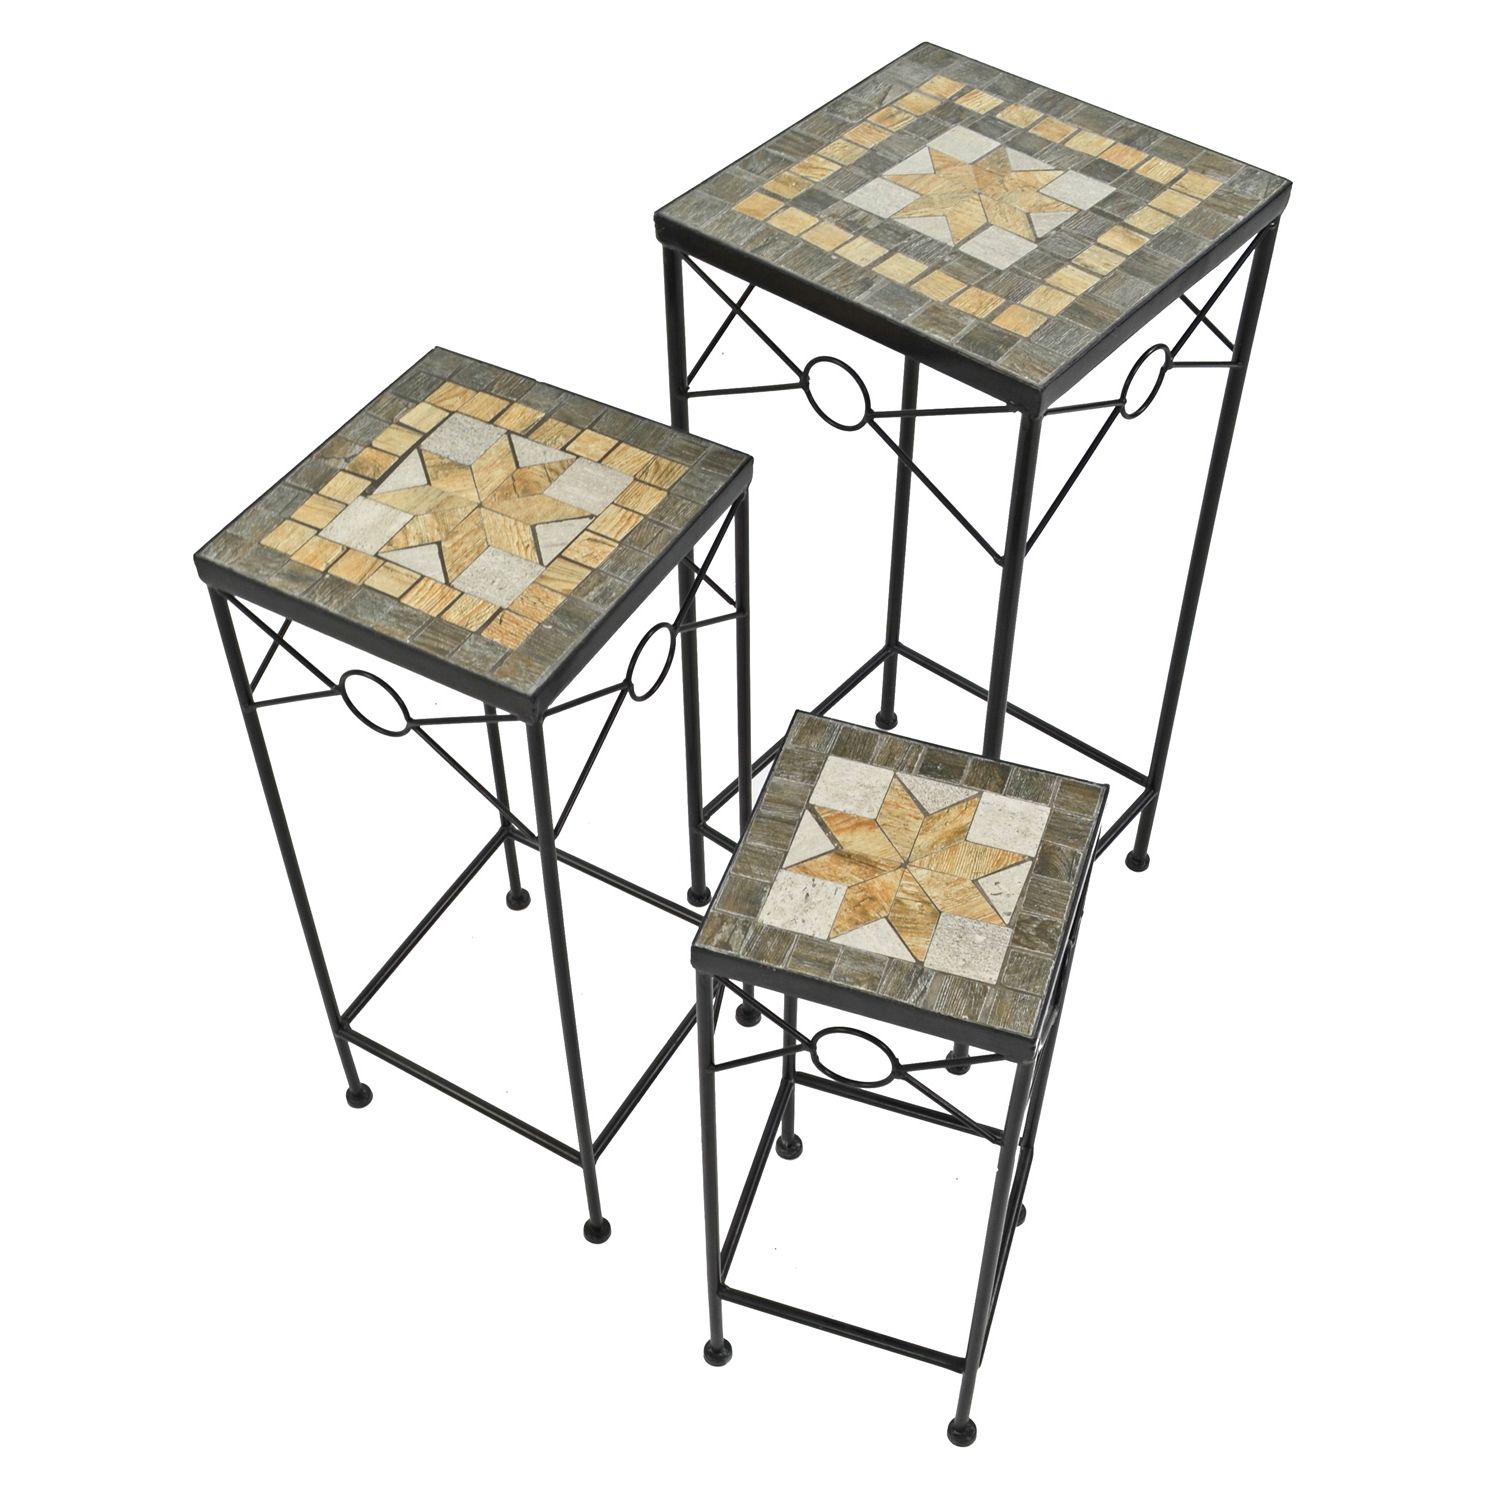 Set Of 3 Tall Square Plant Stands – Brava – Europa Leisure (uk) In 2019 Square Plant Stands (View 15 of 15)